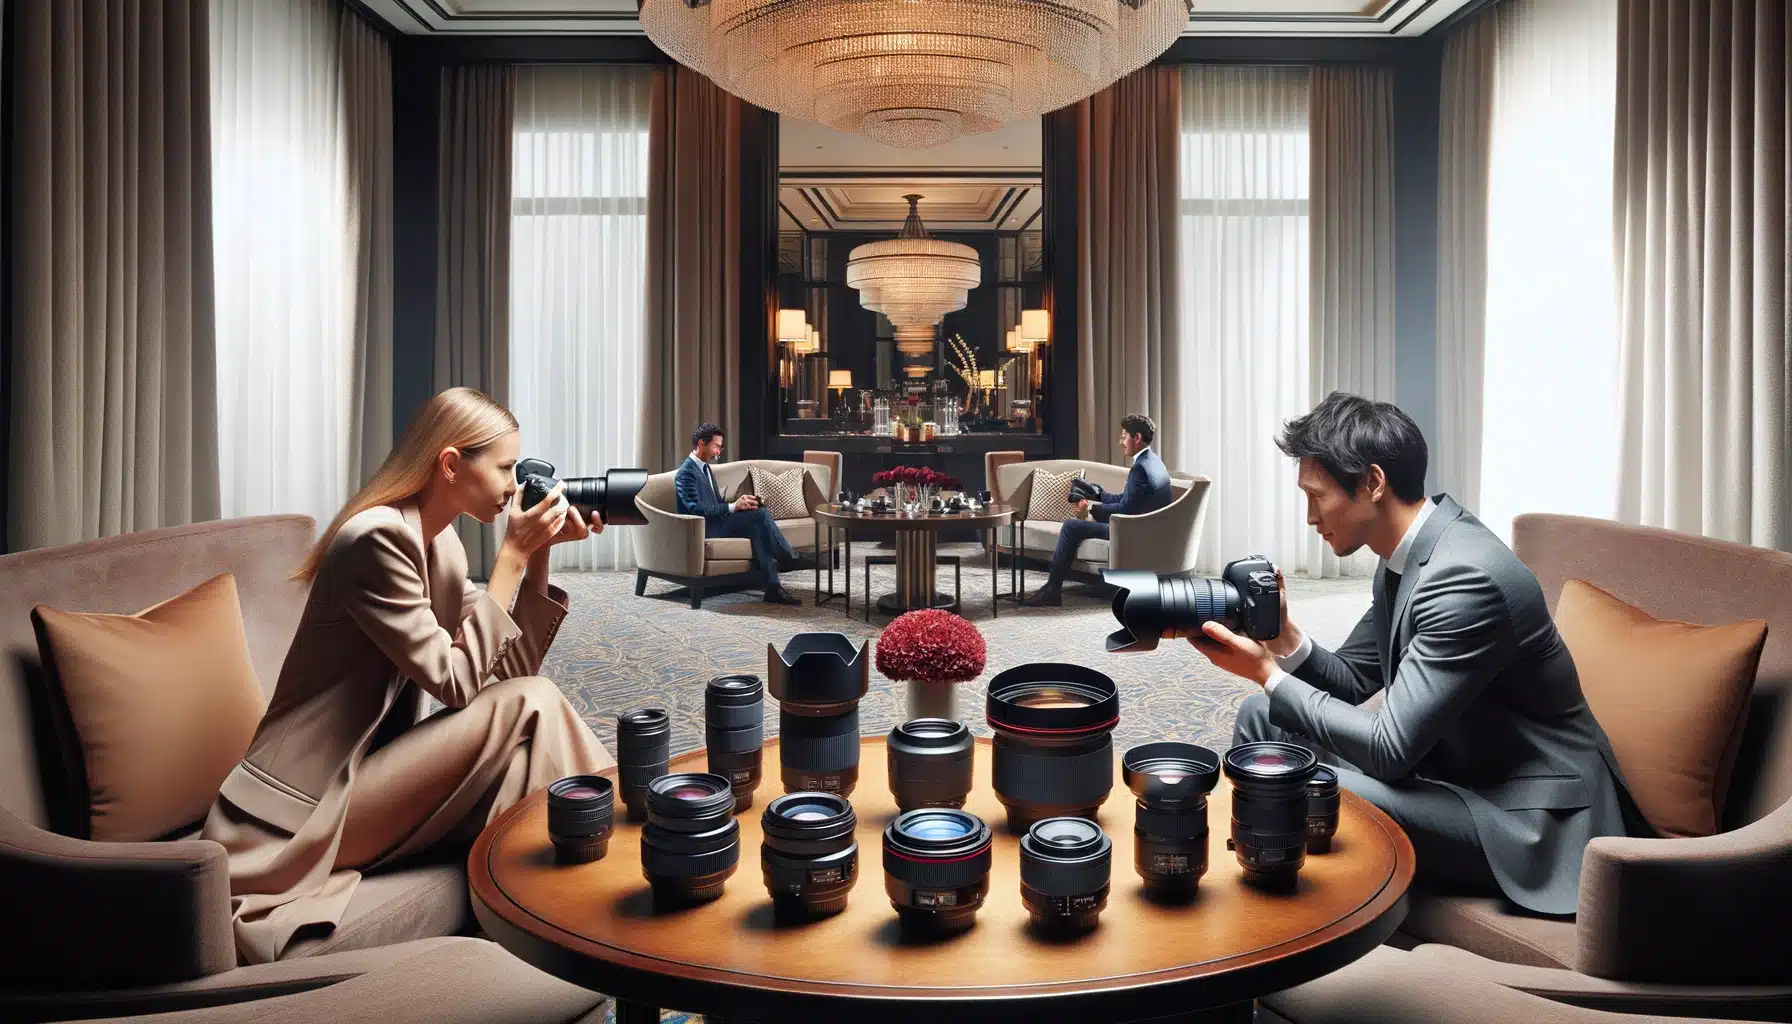 Two photographers in a hotel capturing portraits of people, with various camera spectacles such as wide-angle and telephoto on the surrounding tables.